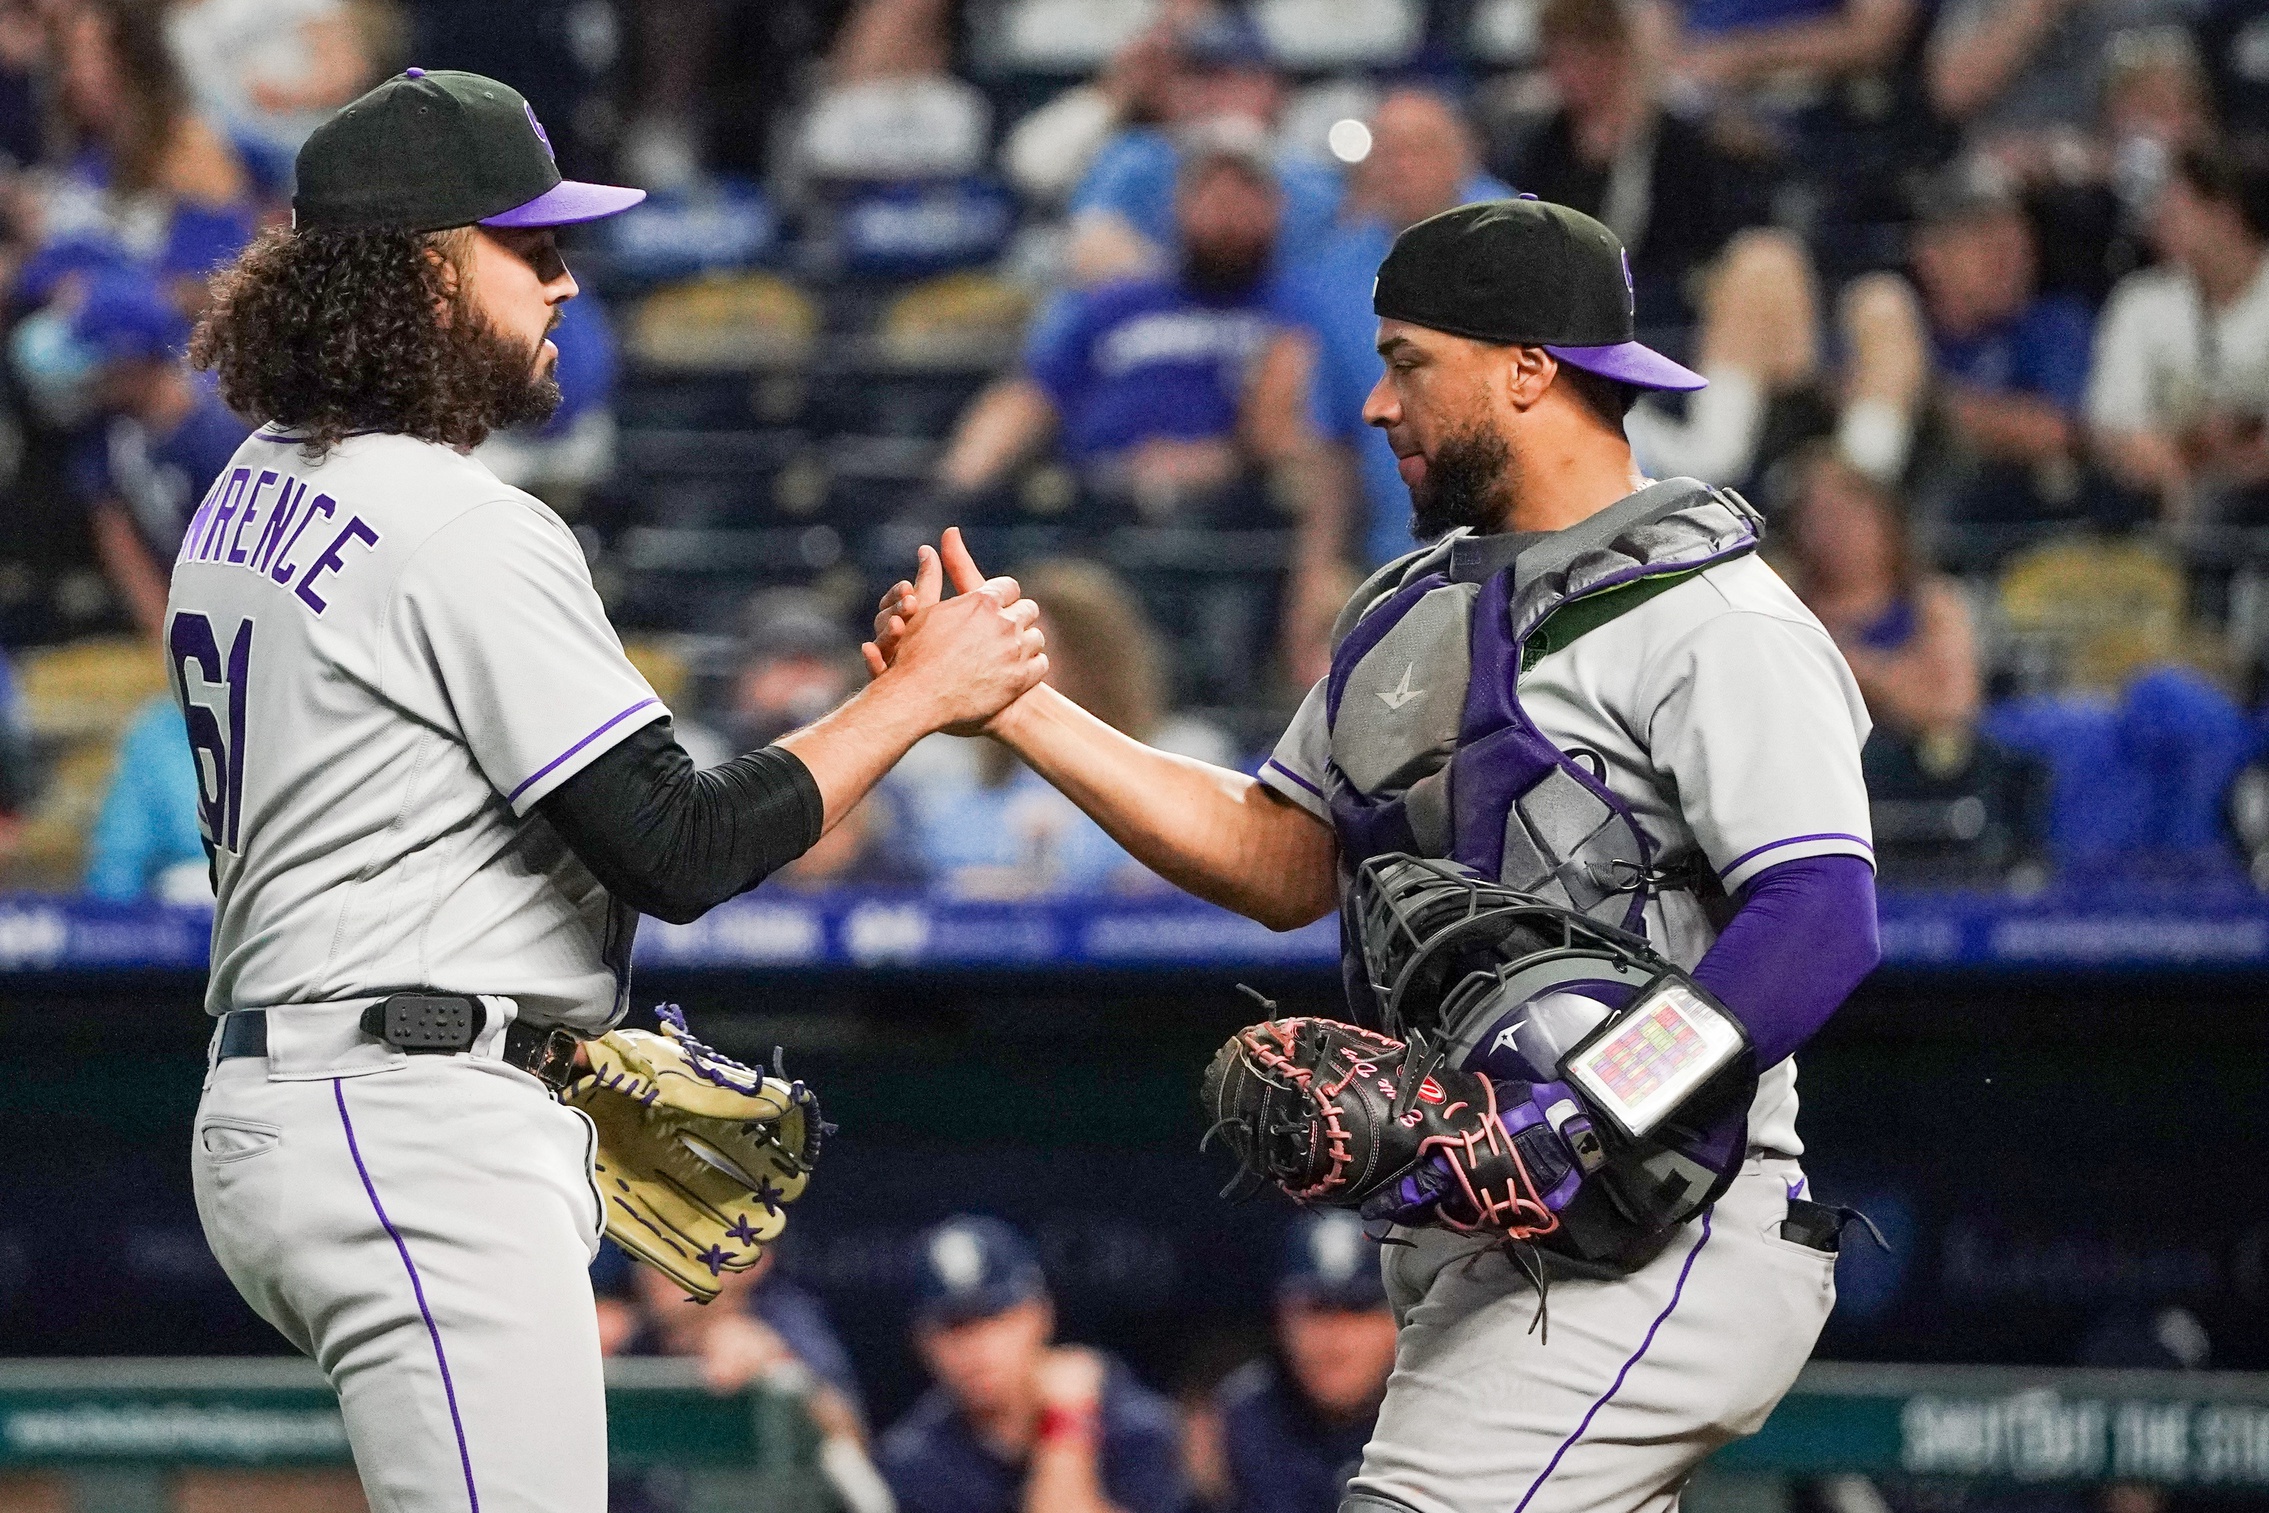 The Rockies' Franchise Catcher Search